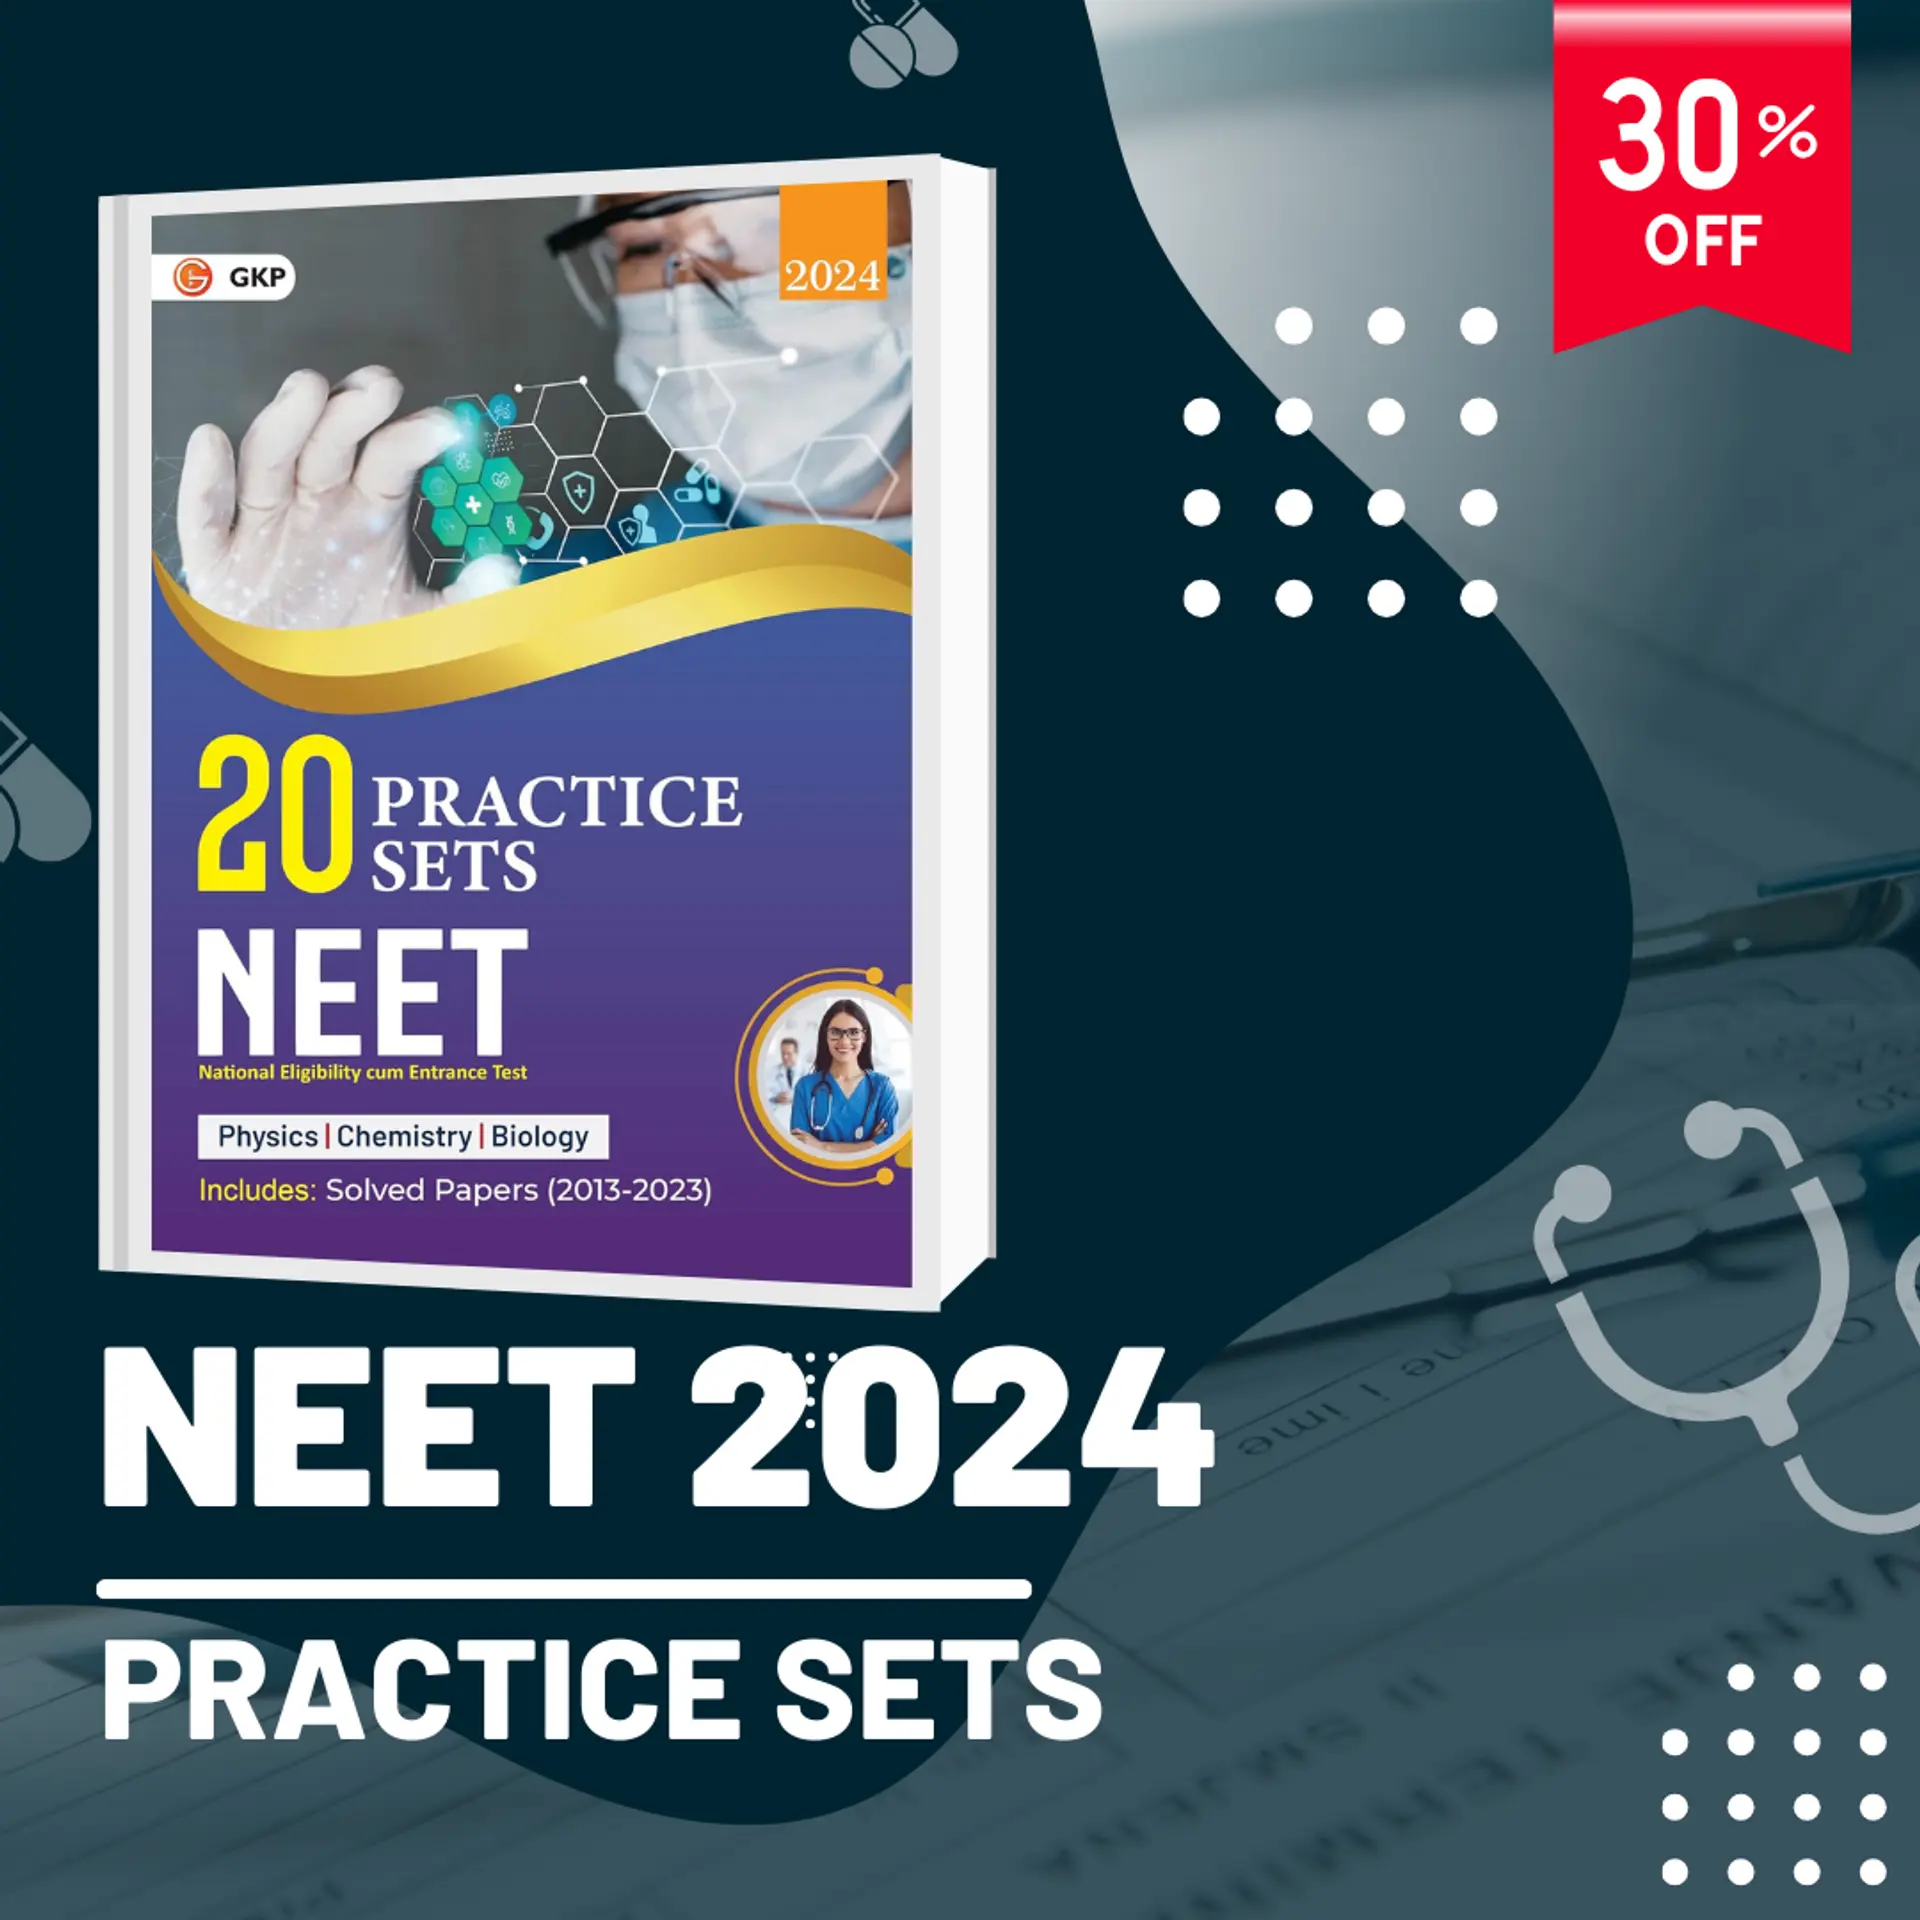 NEET 2024 : 20 Practice Sets (Includes Solved Papers 2013-2023) | GK Publications